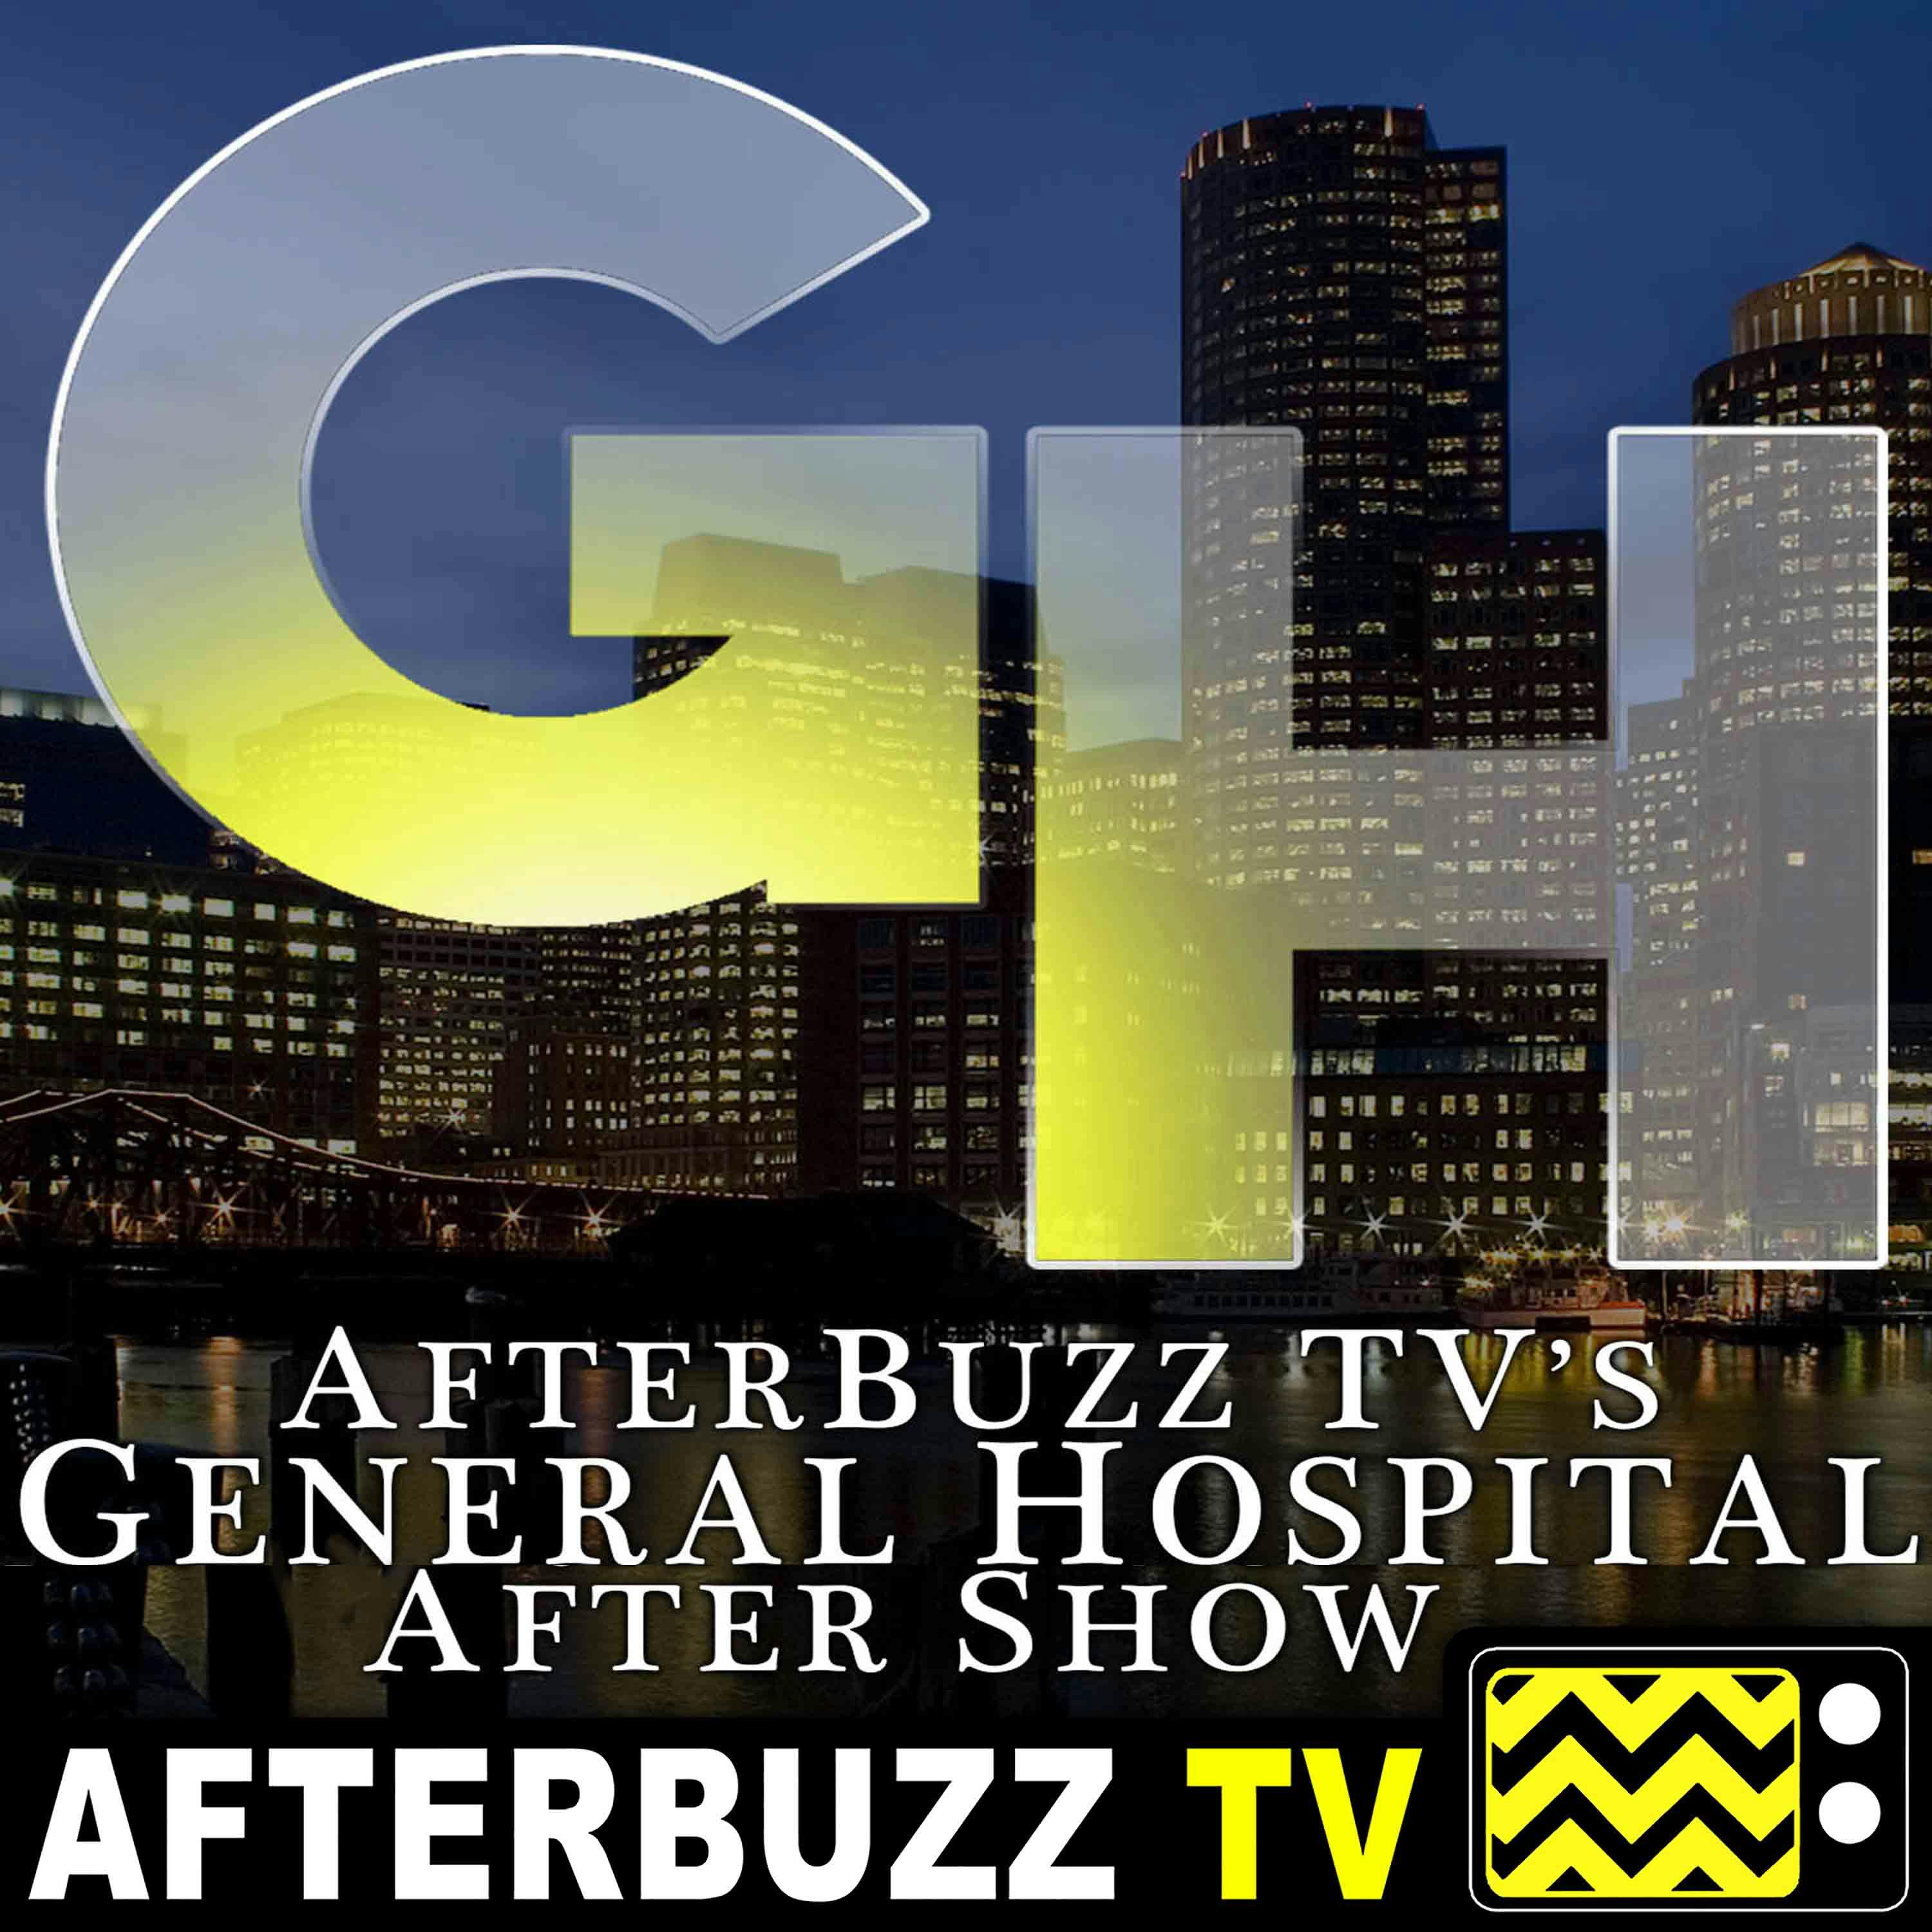 General Hospital for Week of June 24th - June 28th, 2019 | AfterBuzz TV